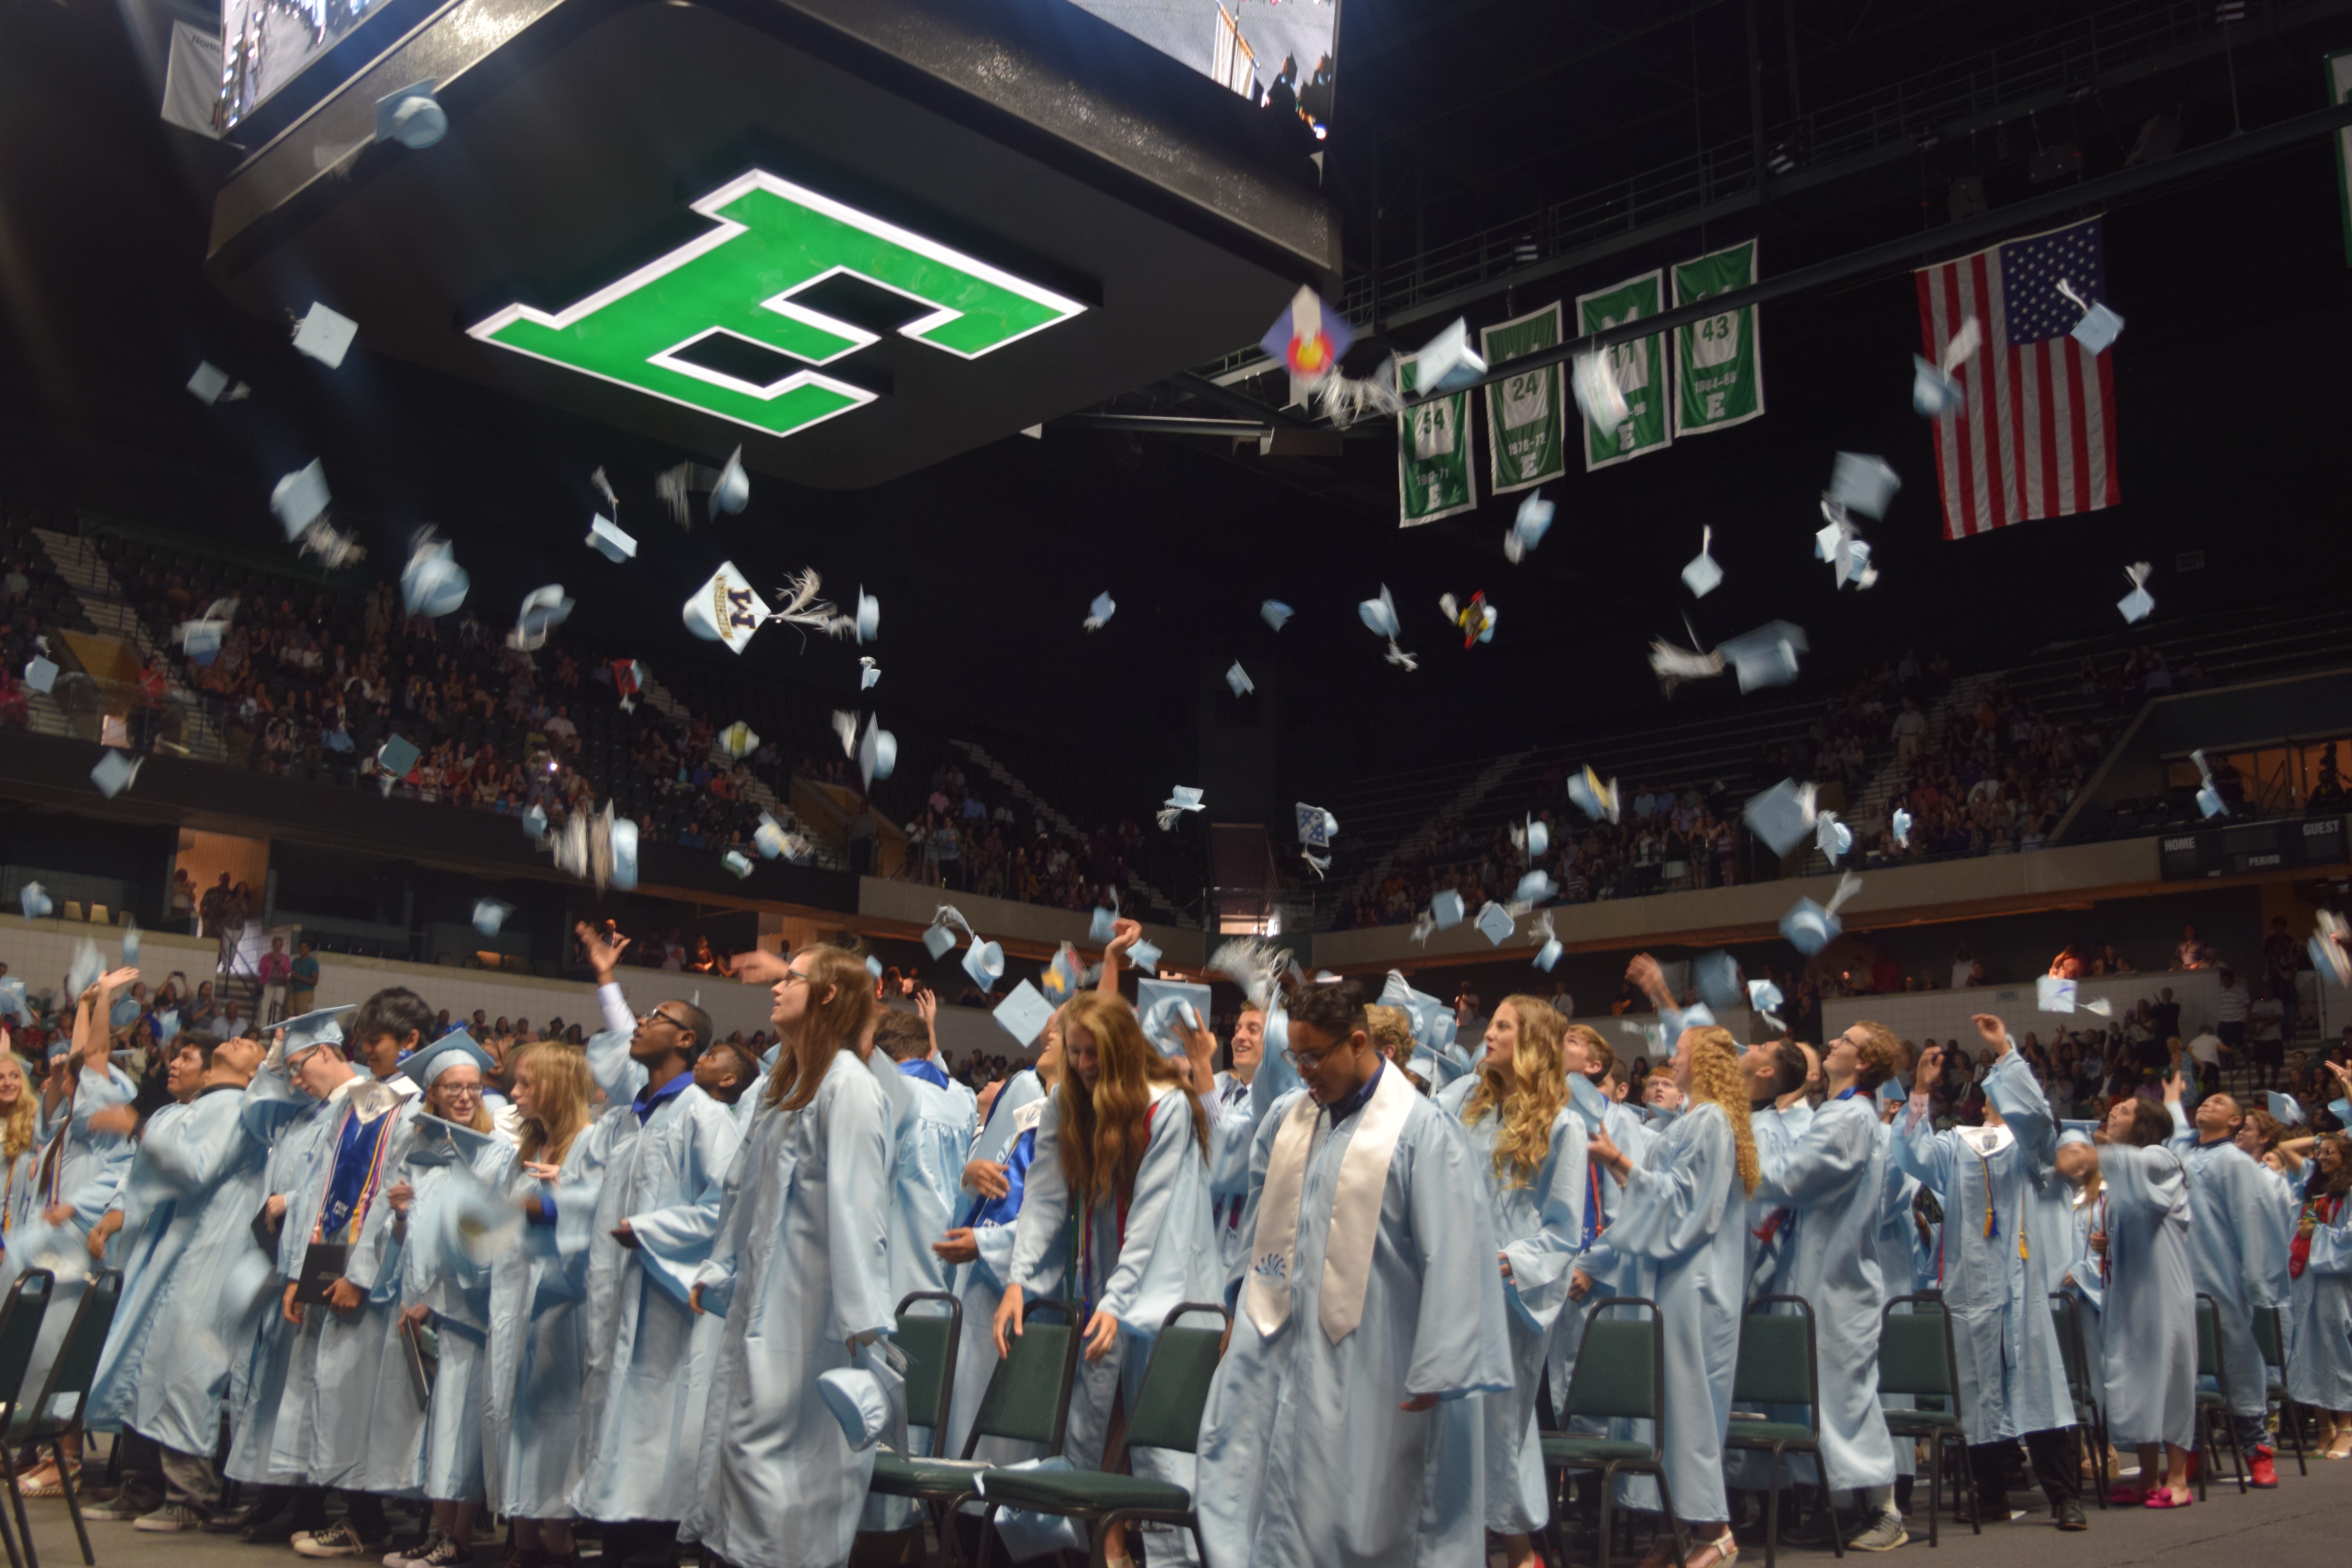 Skyline Graduates celebrate by throwing their caps up into the air